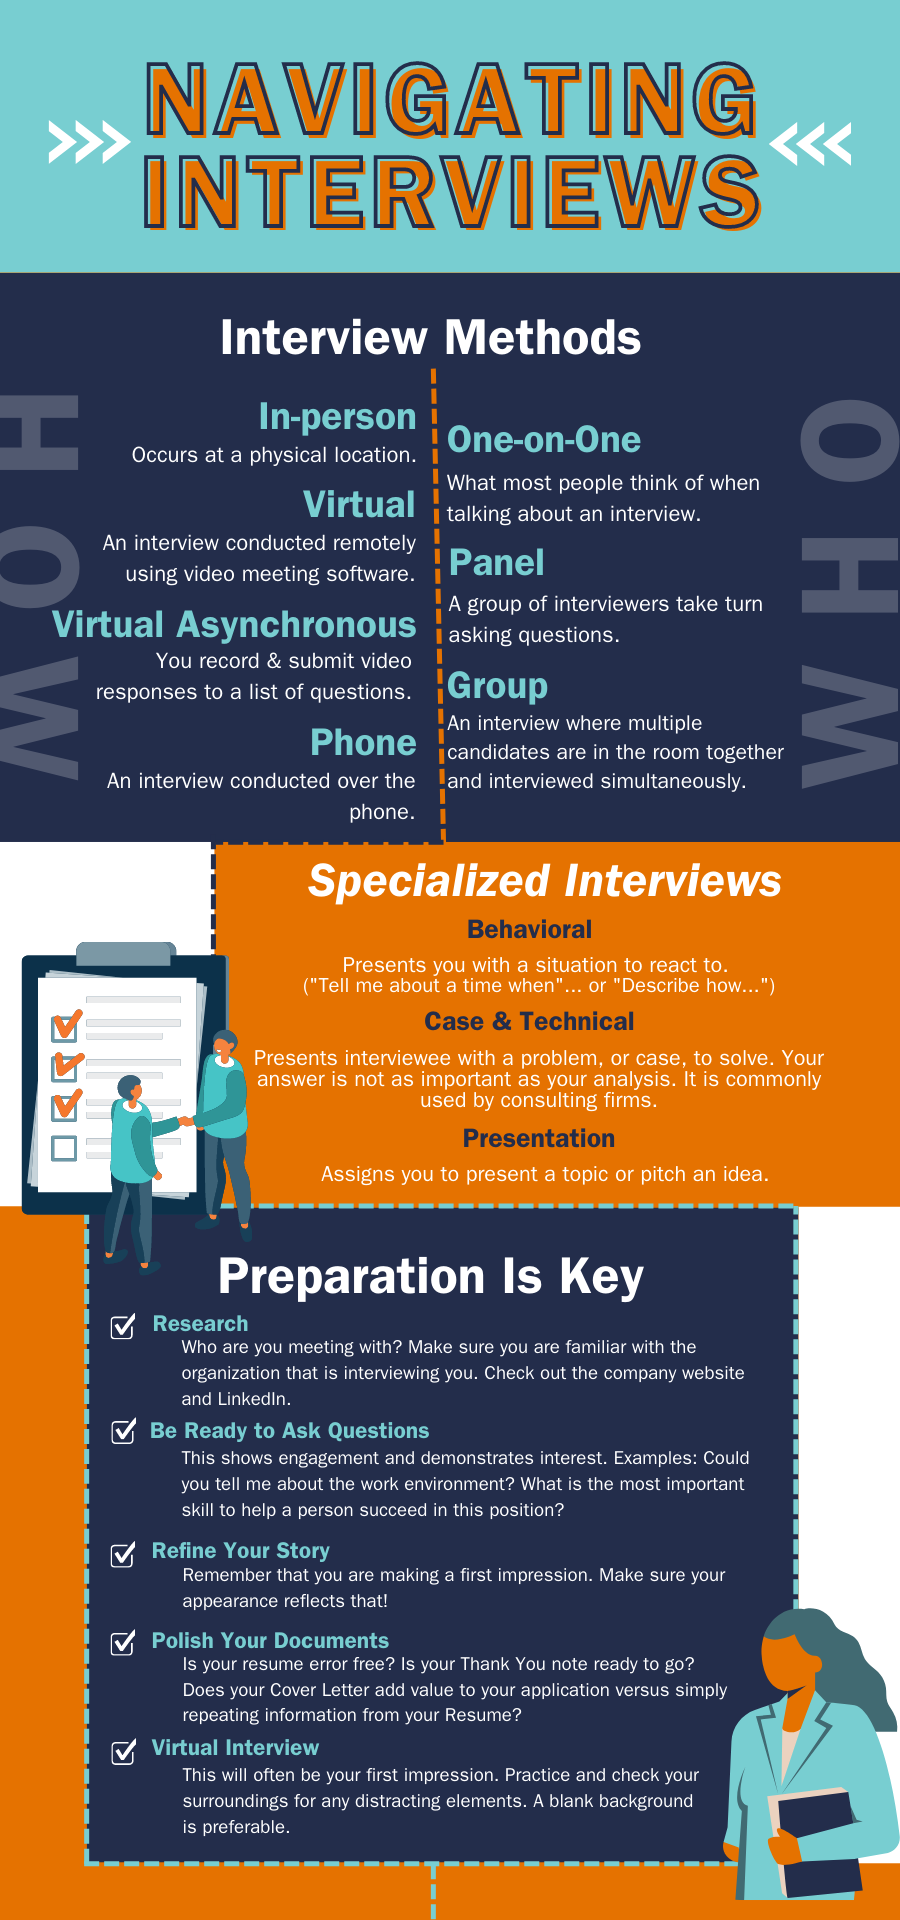 Vertical graphic with the title “Navigating Interviews” in all orange capital letters on a light teal background. The body of the graphic is divided into three rectangular sections with the subtitles Interview Methods, Specialized Interviews, and Preparation is Key. 